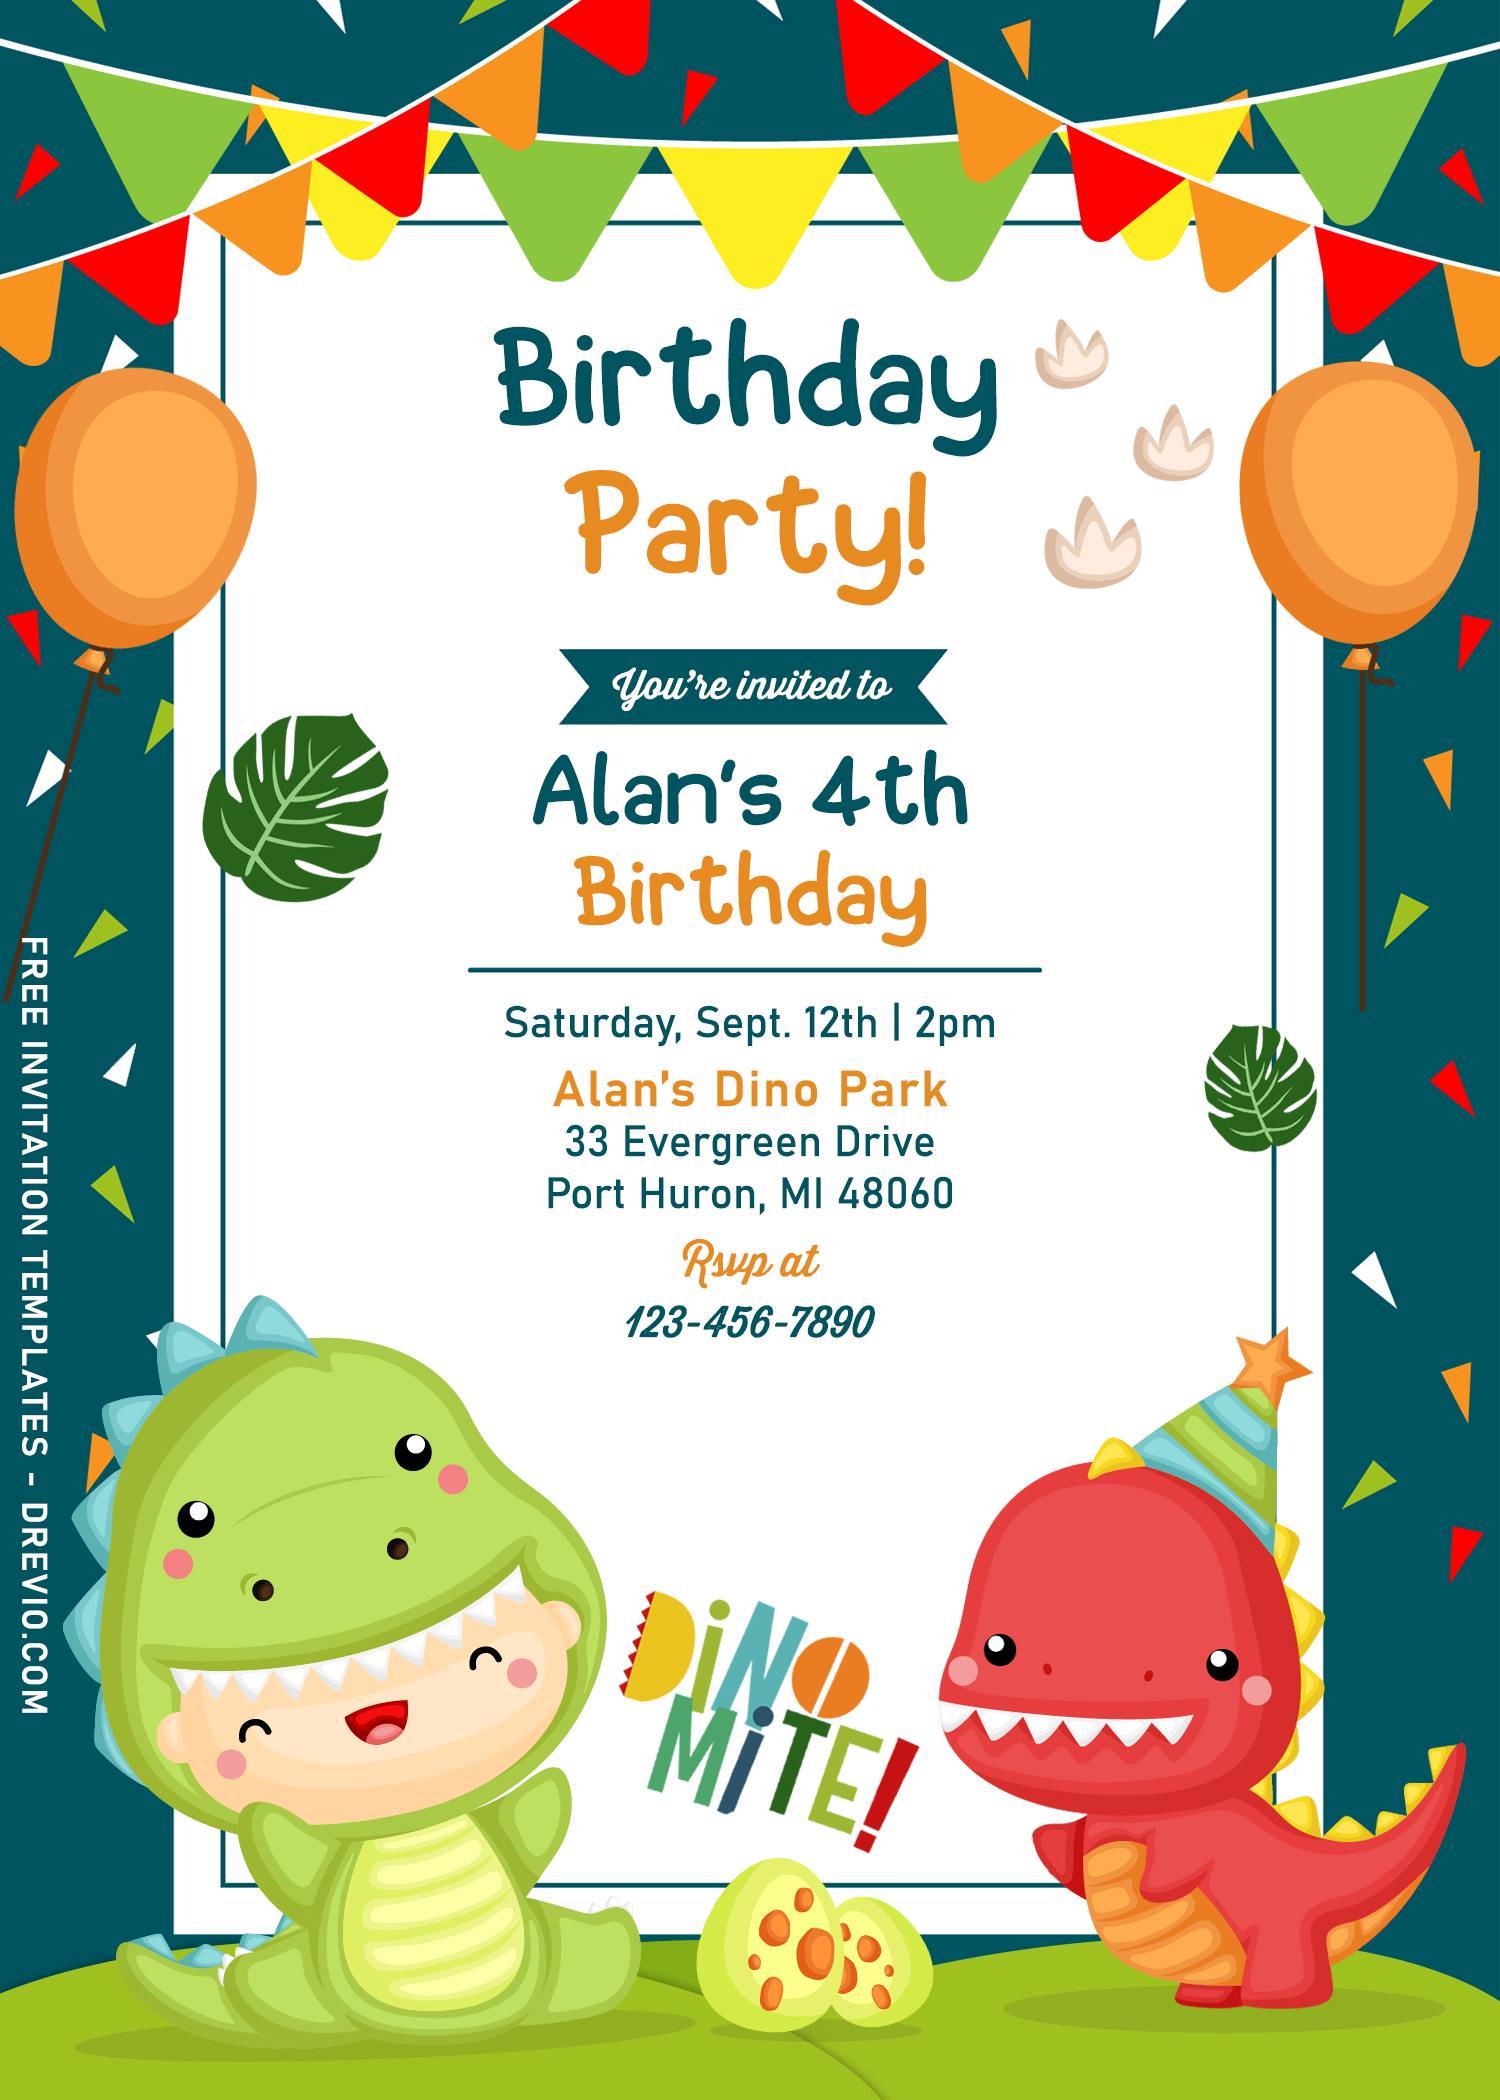 9-awesome-dino-party-birthday-invitation-templates-download-hundreds-free-printable-birthday